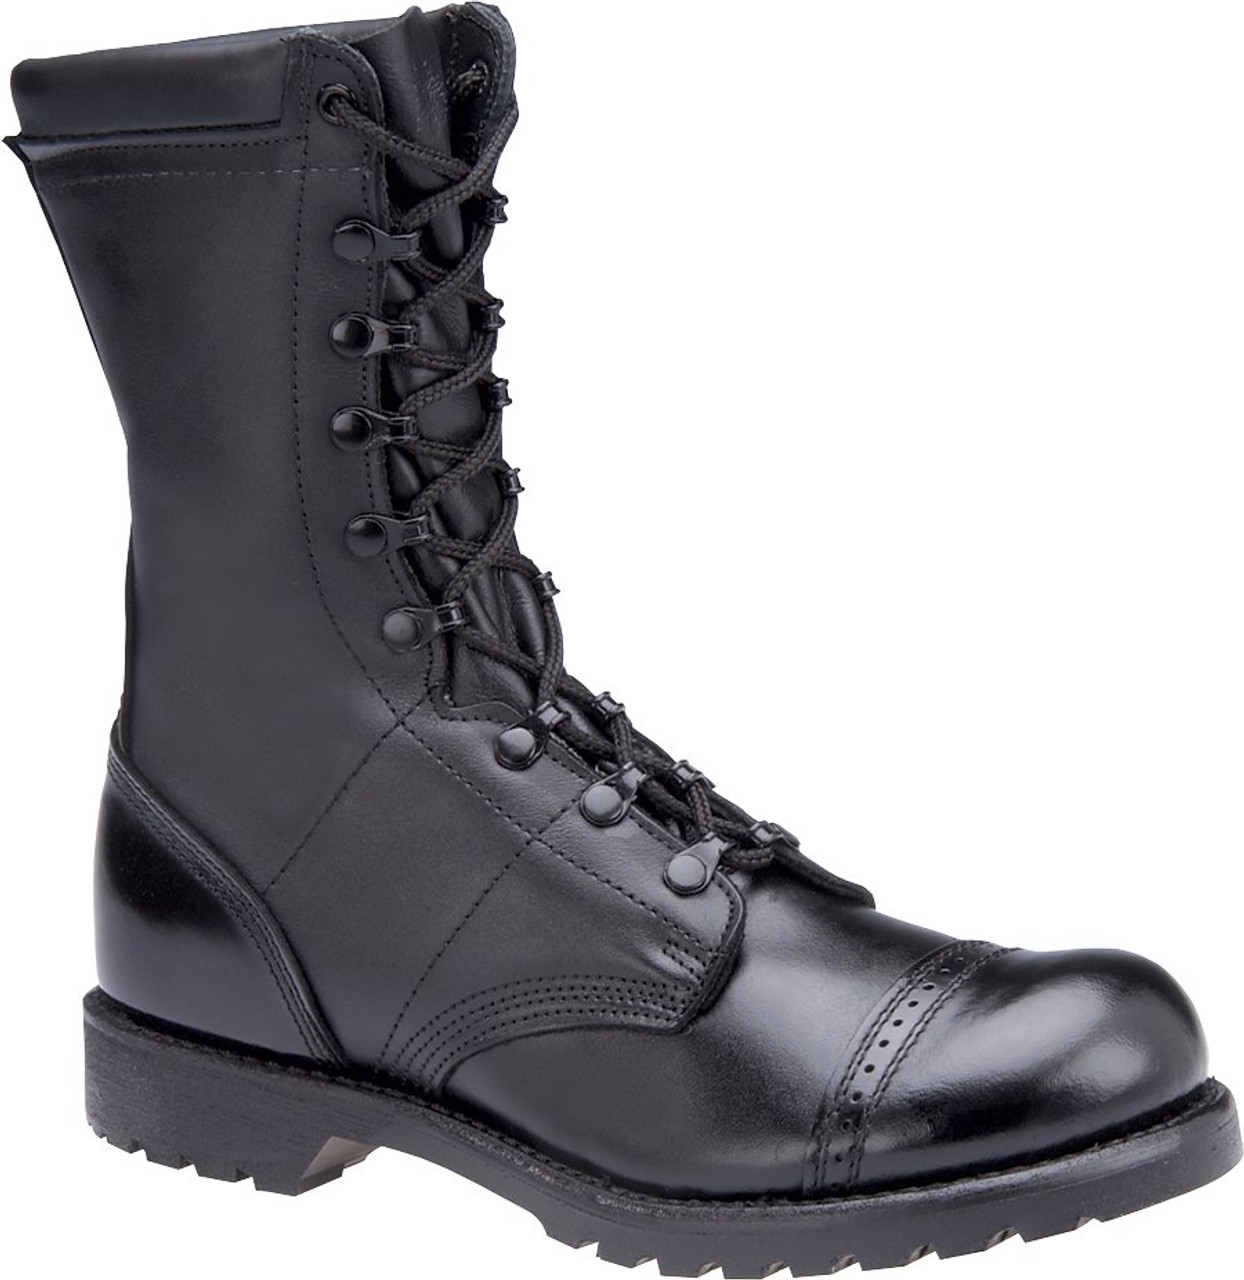 Men's 10" Leather Field Boot